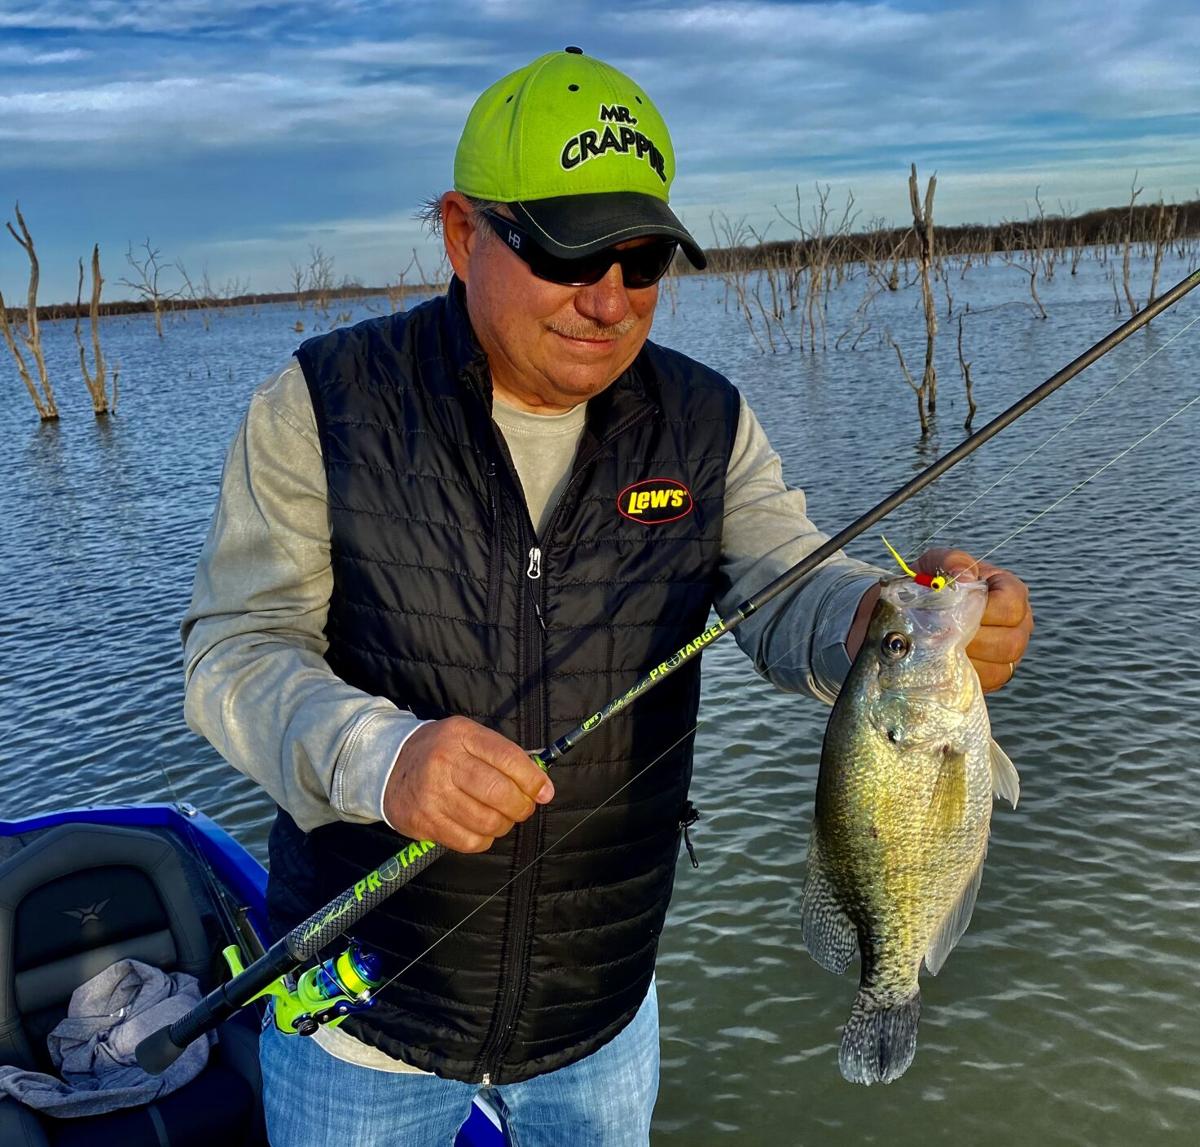 Crappie Fishing - Wally Marshall Pro Target Rods by Lew's 